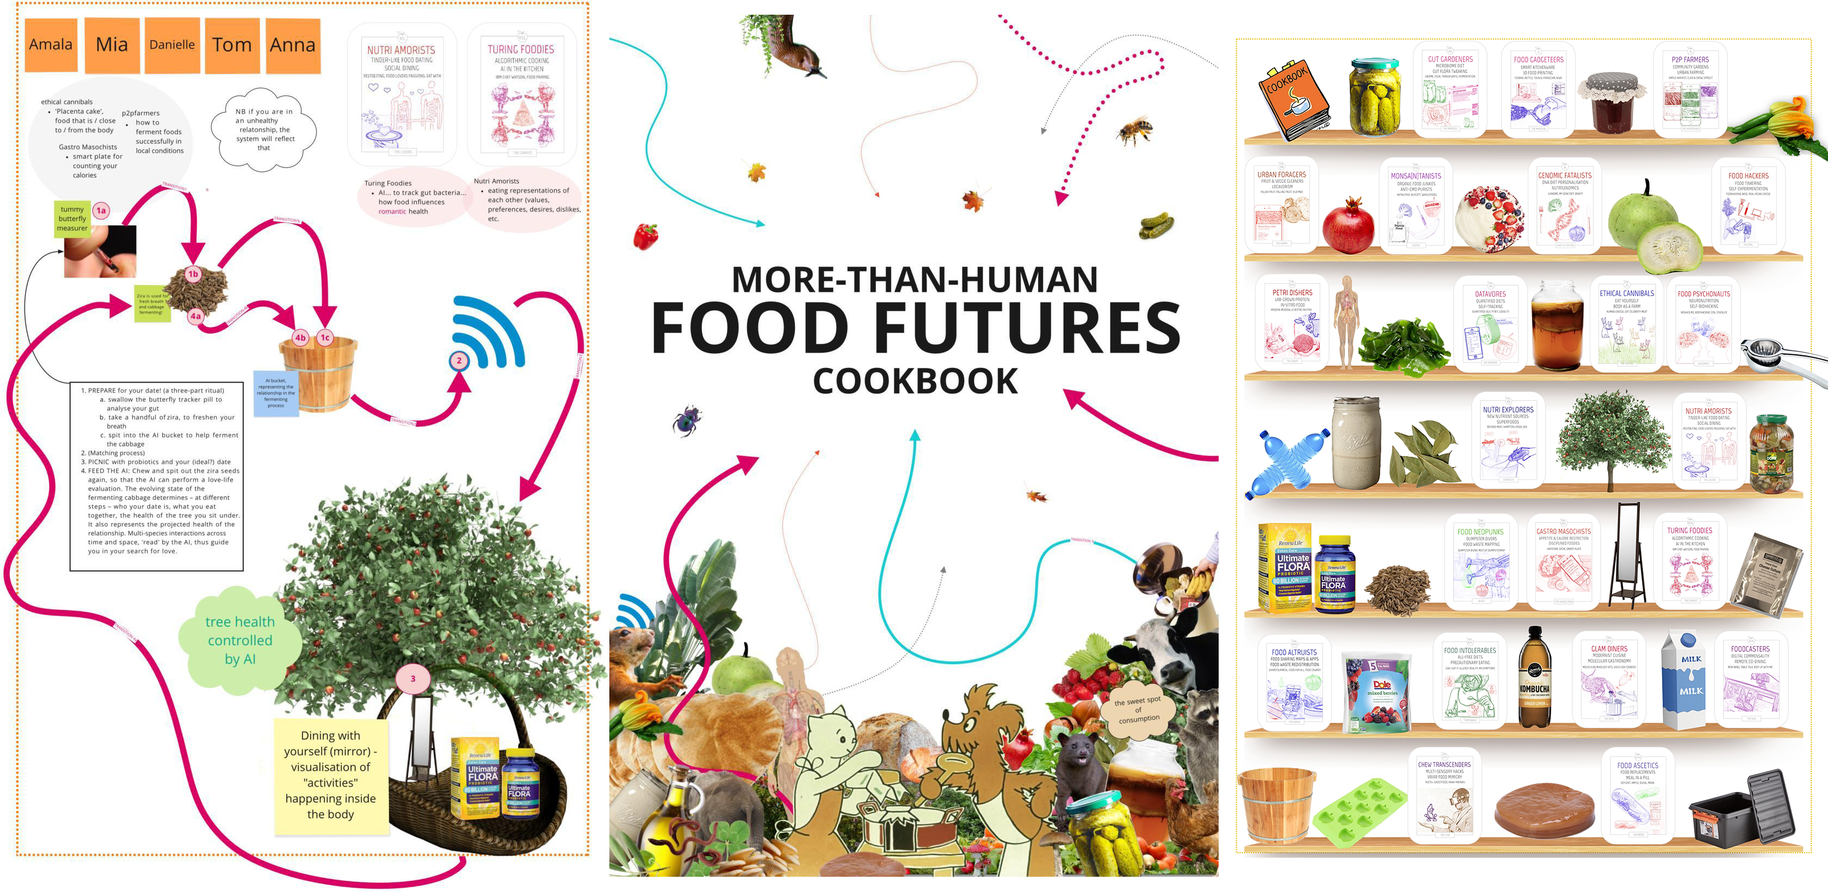 Composite image of the cover and selected pages of the More-than-human Food Futures cookbook